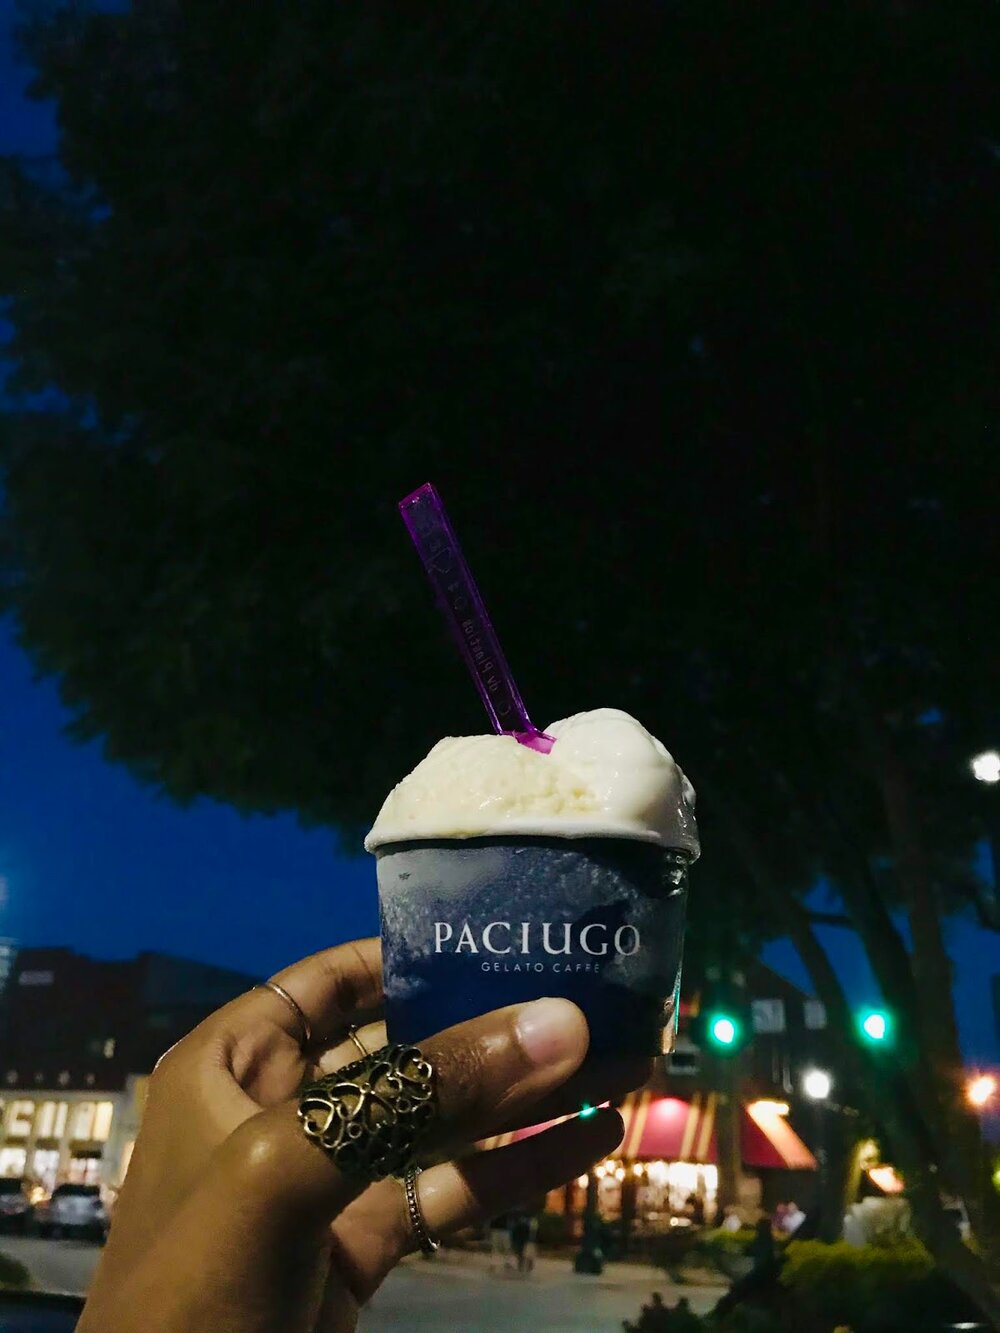 Nightly City Outing: Hanging Out With The Gals, Getting Icecream And Other Fun Things!